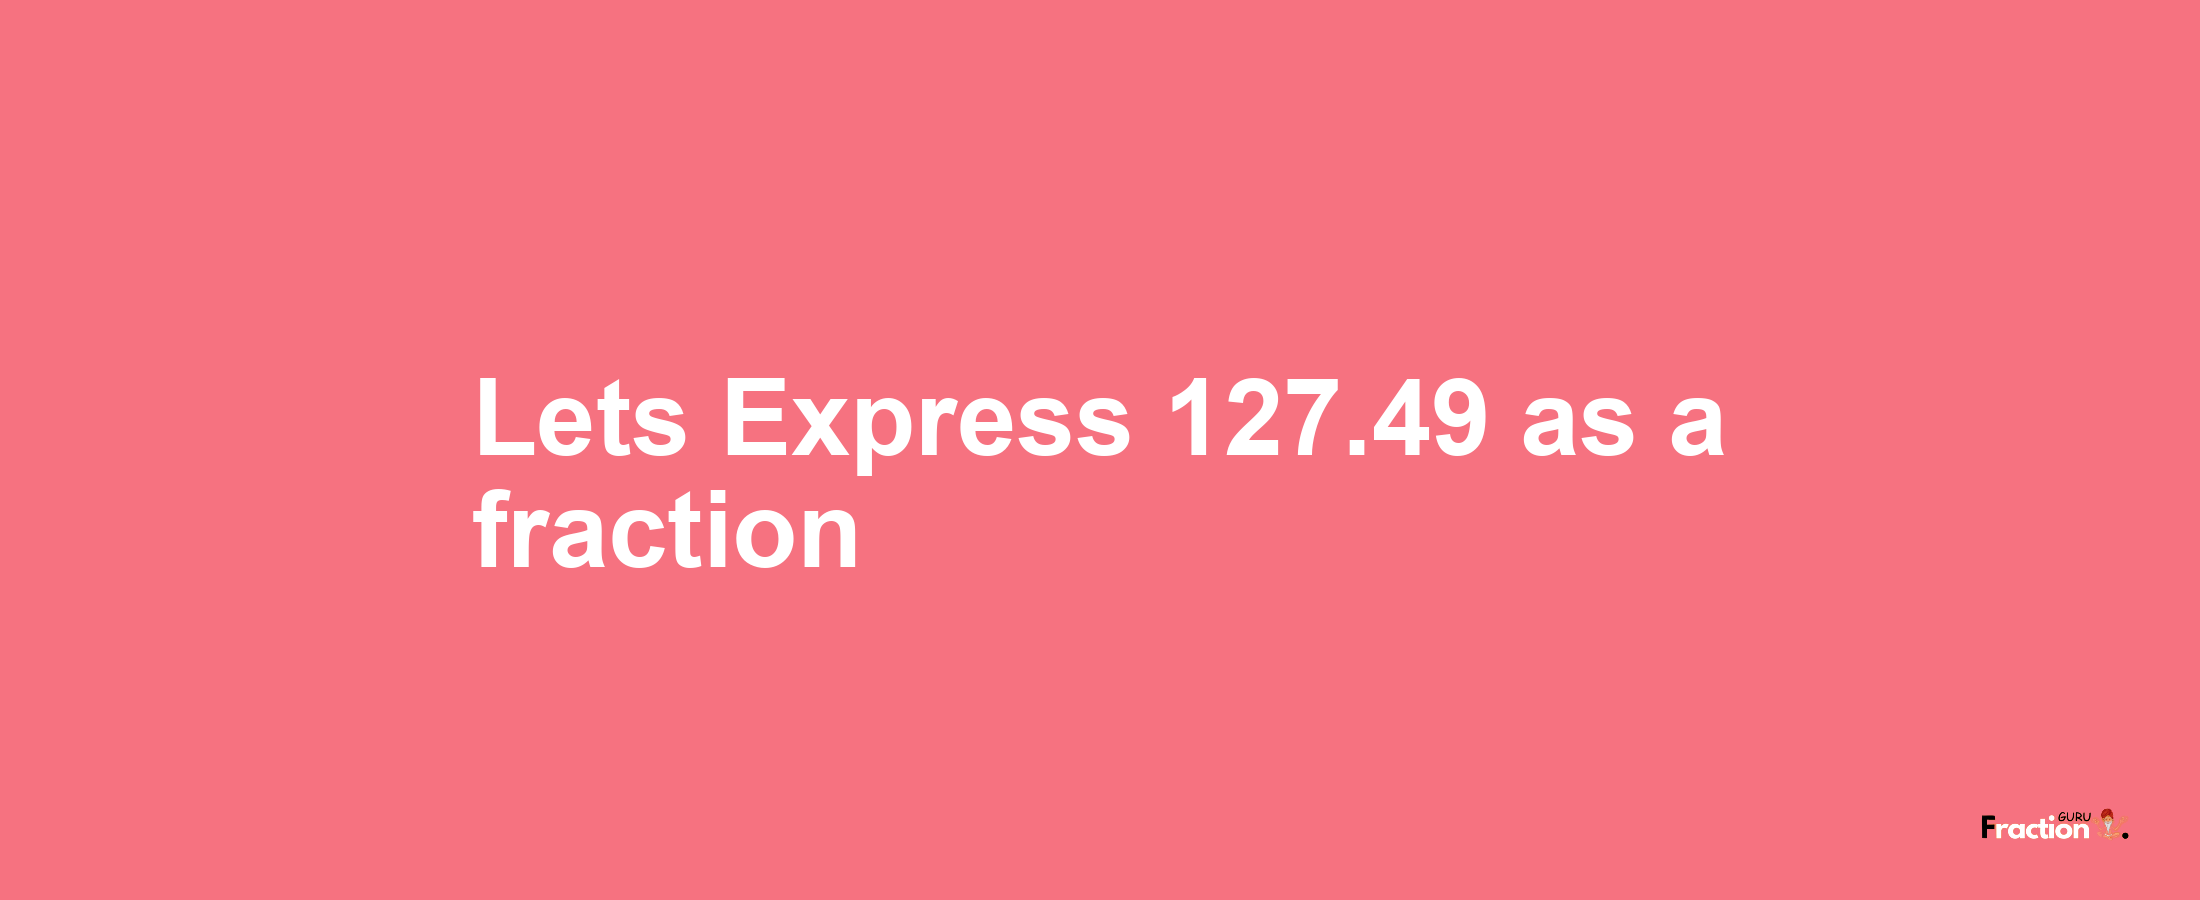 Lets Express 127.49 as afraction